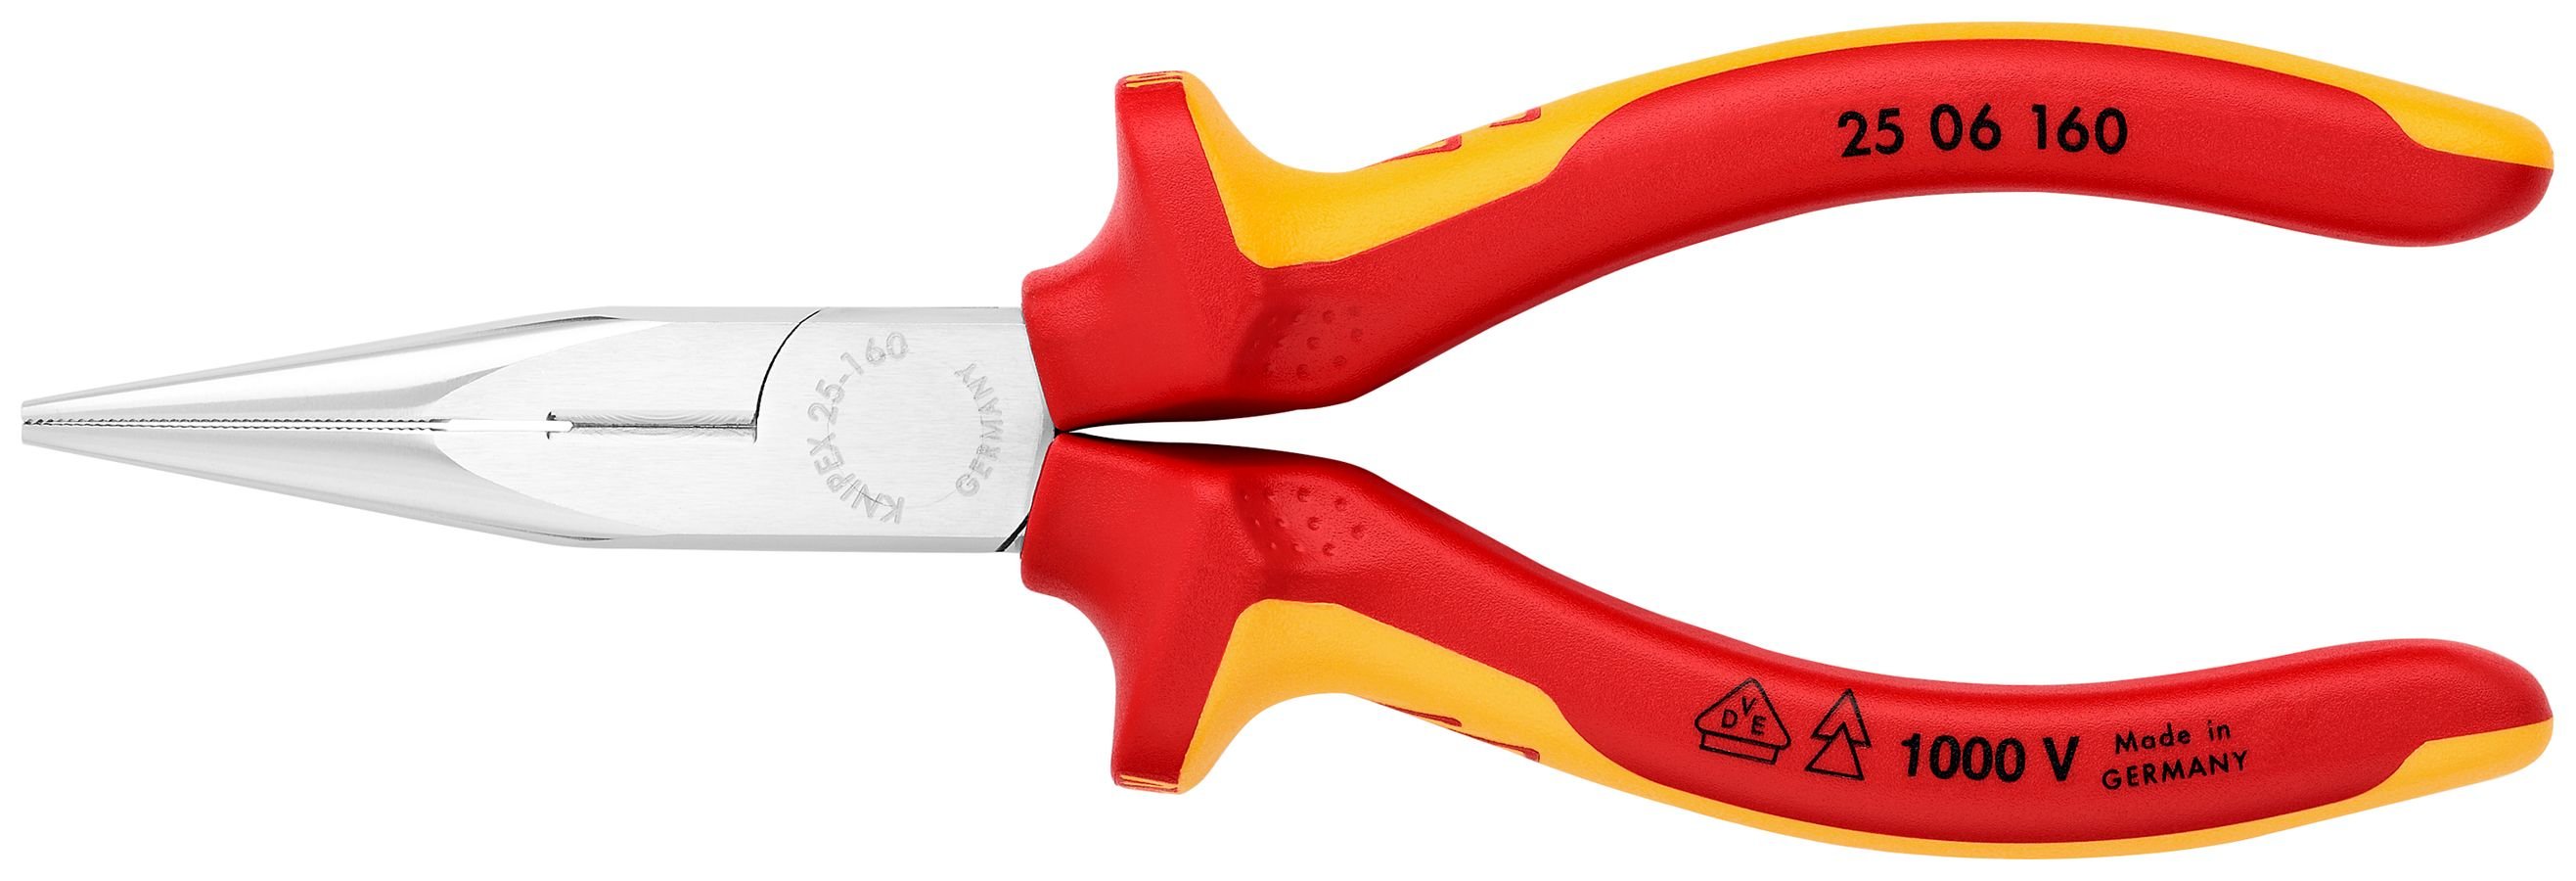 Long Nose Pliers with Cutter-1000V Insulated | KNIPEX Tools